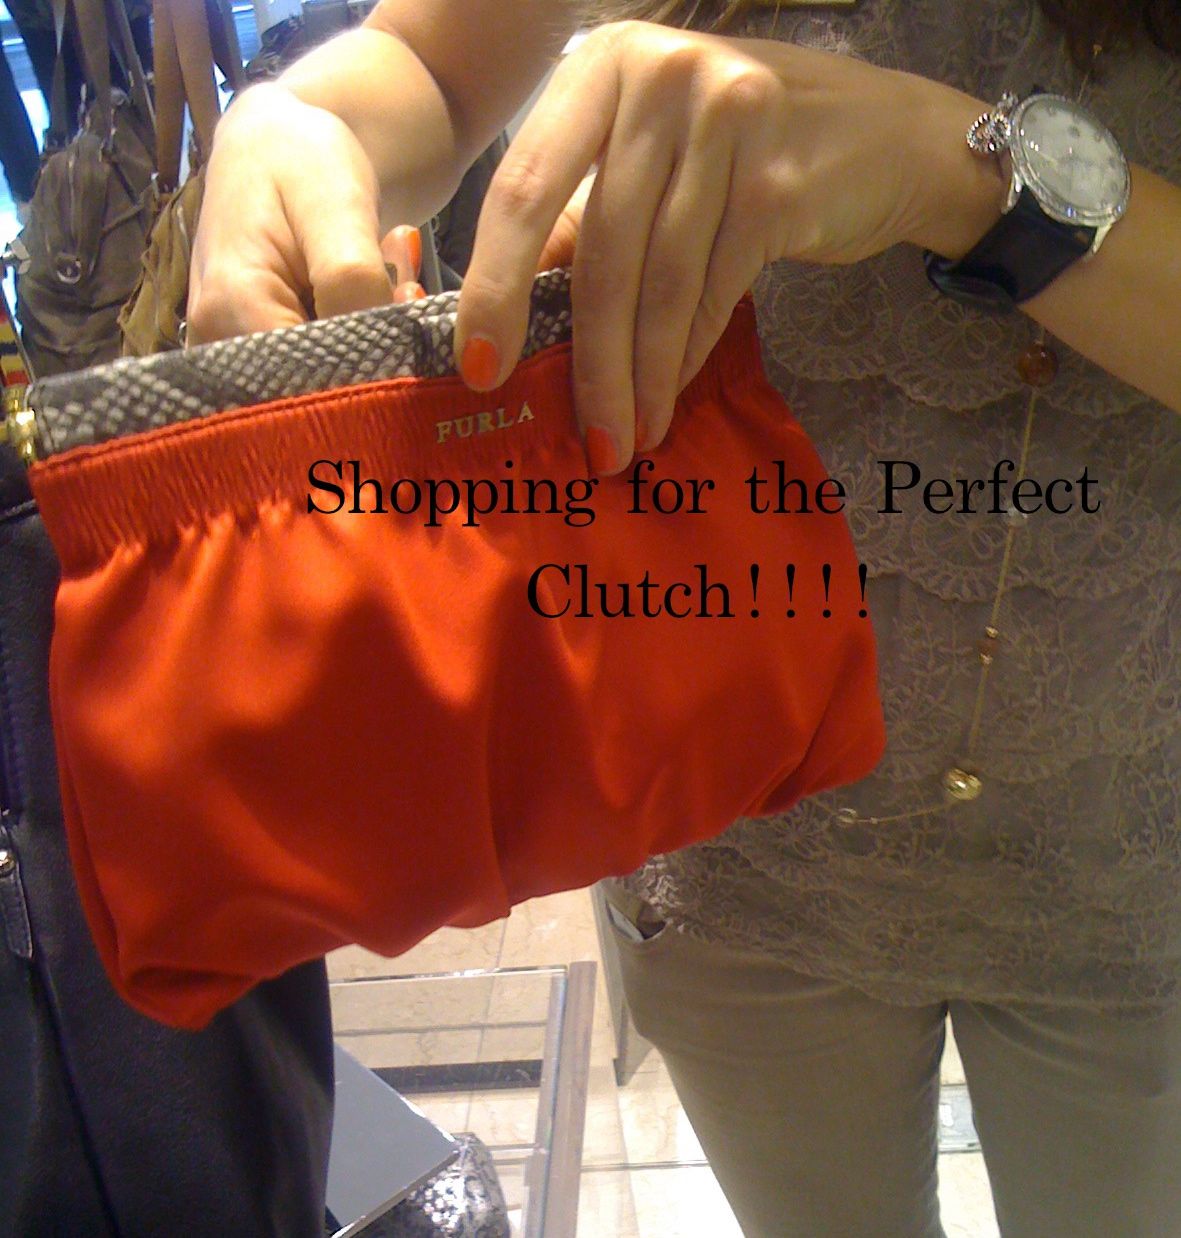 You are currently viewing <!--:en-->The Perfect Red Clutch!!!!!!Gala Clutch Shopping!!!!<!--:-->